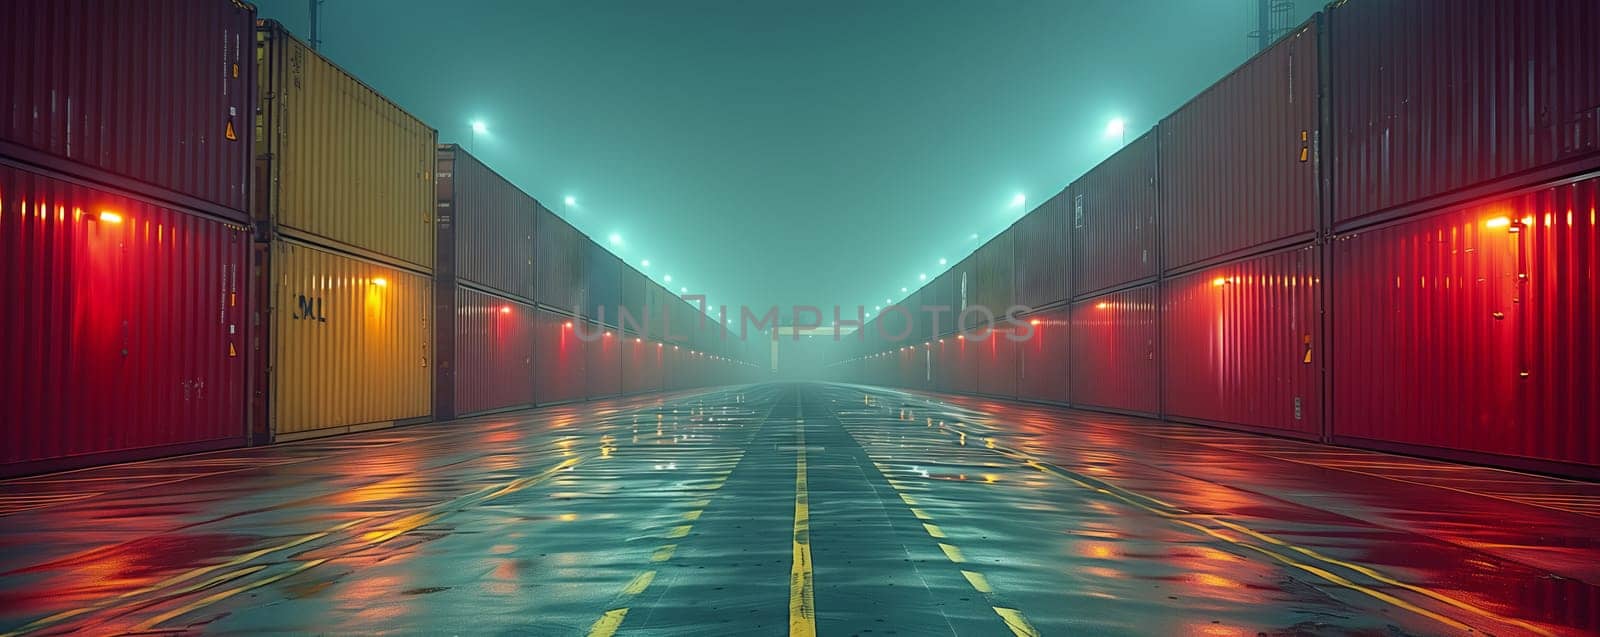 A row of shipping containers in a warehouse creates a symmetrical pattern on a foggy day, highlighted by the electric blue display devices on the road